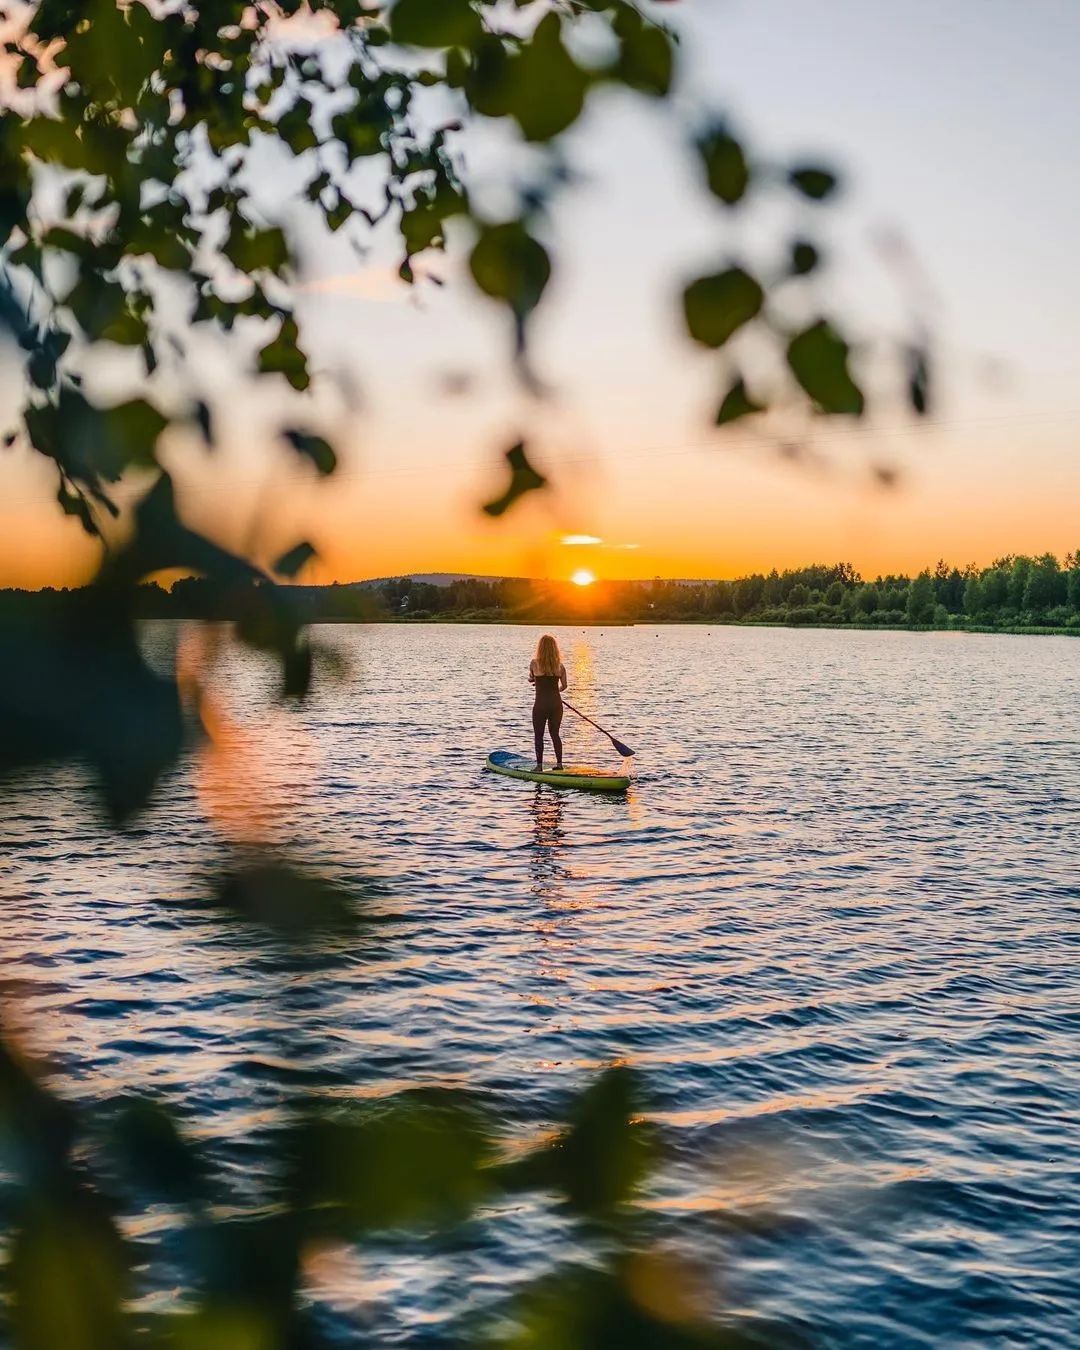 Rovaniemi nature slowly getting a green summer look! 🥰💚 The past days have been +20 degrees and the new leafs on trees are unfolding. There is magic in the air on the Arctic Circle! 💚🌞

#Rovaniemi #visitrovaniemi #arcticcircle #midnightsun #suomi #laplandfinland #lapland #finland #supboard #summer #keskiyönaurinko #kesä #water #onlyinlapland #lappi #suppailu